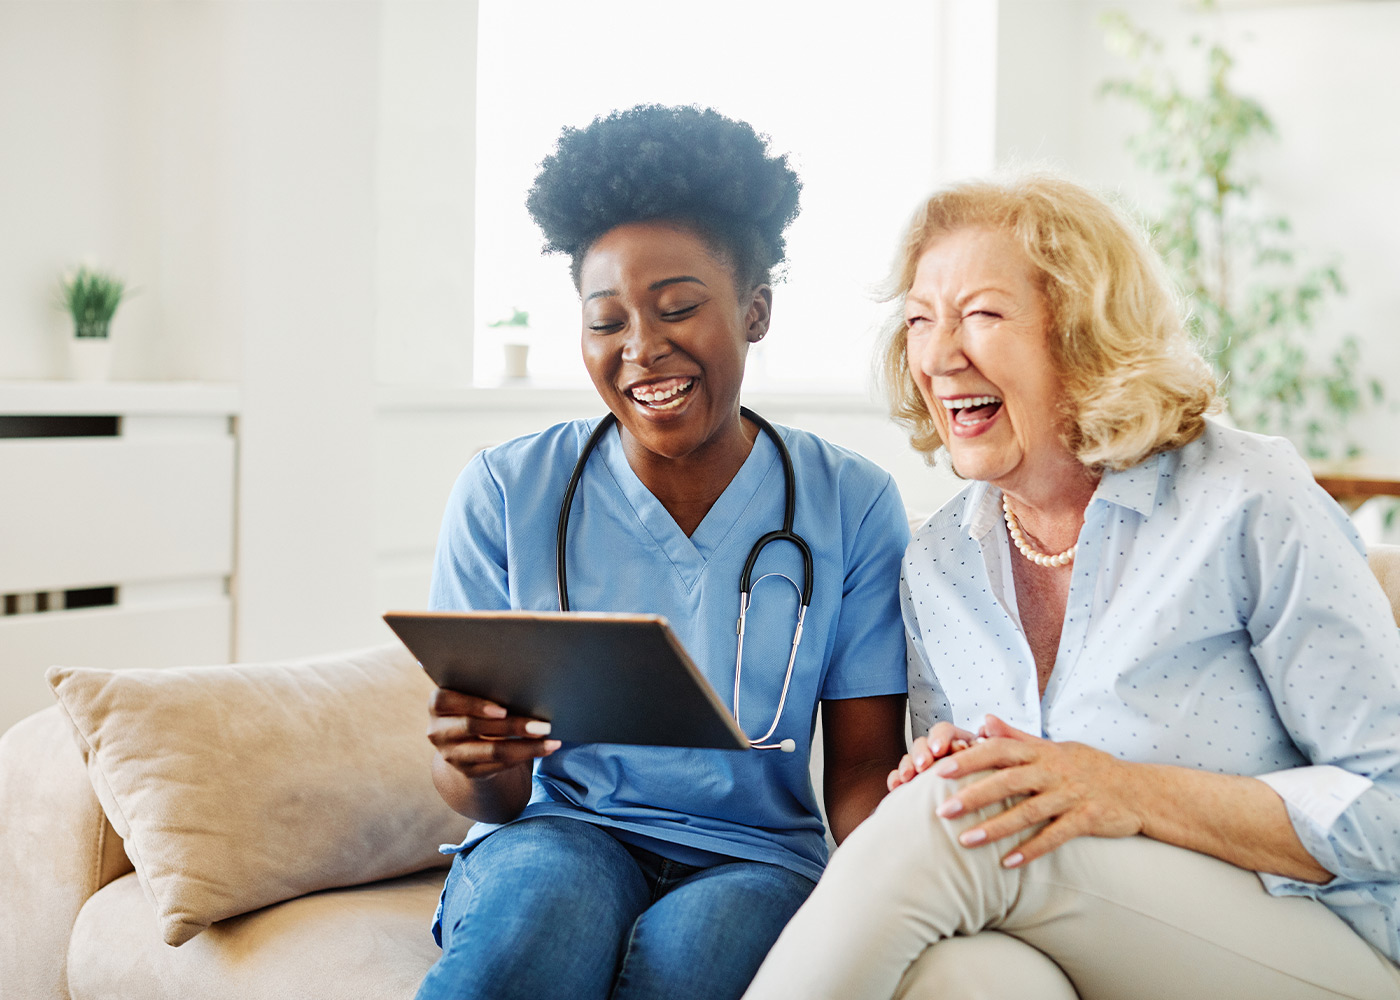 Caregiver holding tablet; sitting next to older woman; both laughing and smiling